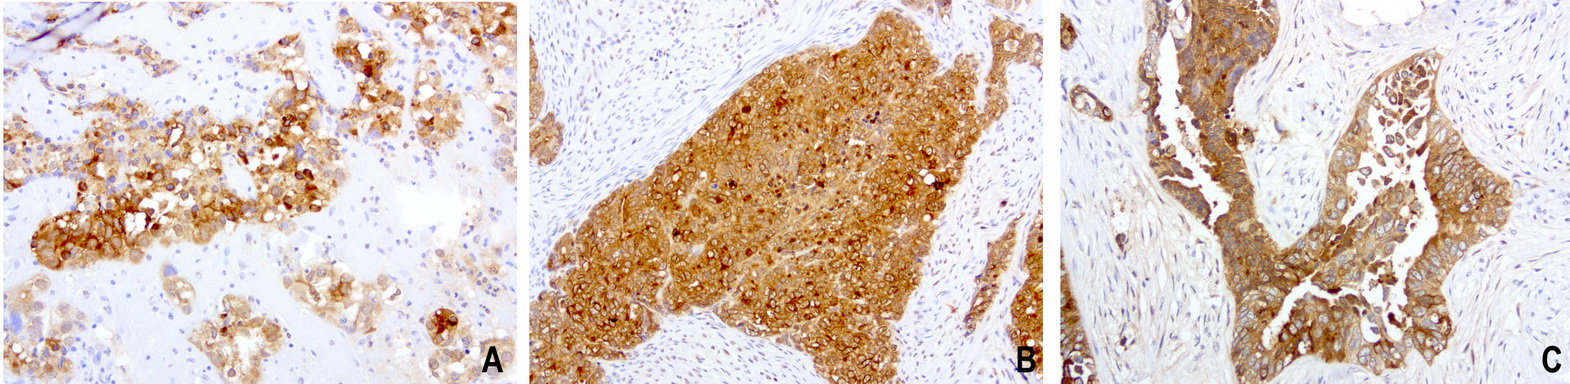 WFDC2 / HE4 Antibody - Immunohistochemical staining of paraffin-embedded 3 human endometrial cancer using anti-HE4 clone UMAB88 mouse monoclonal antibody at 1:200 dilution of 1.0 mg/mL using Polink2 Broad HRP DAB for detection.requires HIER with with citrate pH6.0 at 110C for 3 min using pressure chamber/cooker. The tumor cells show membrane and cytoplasmic staining.